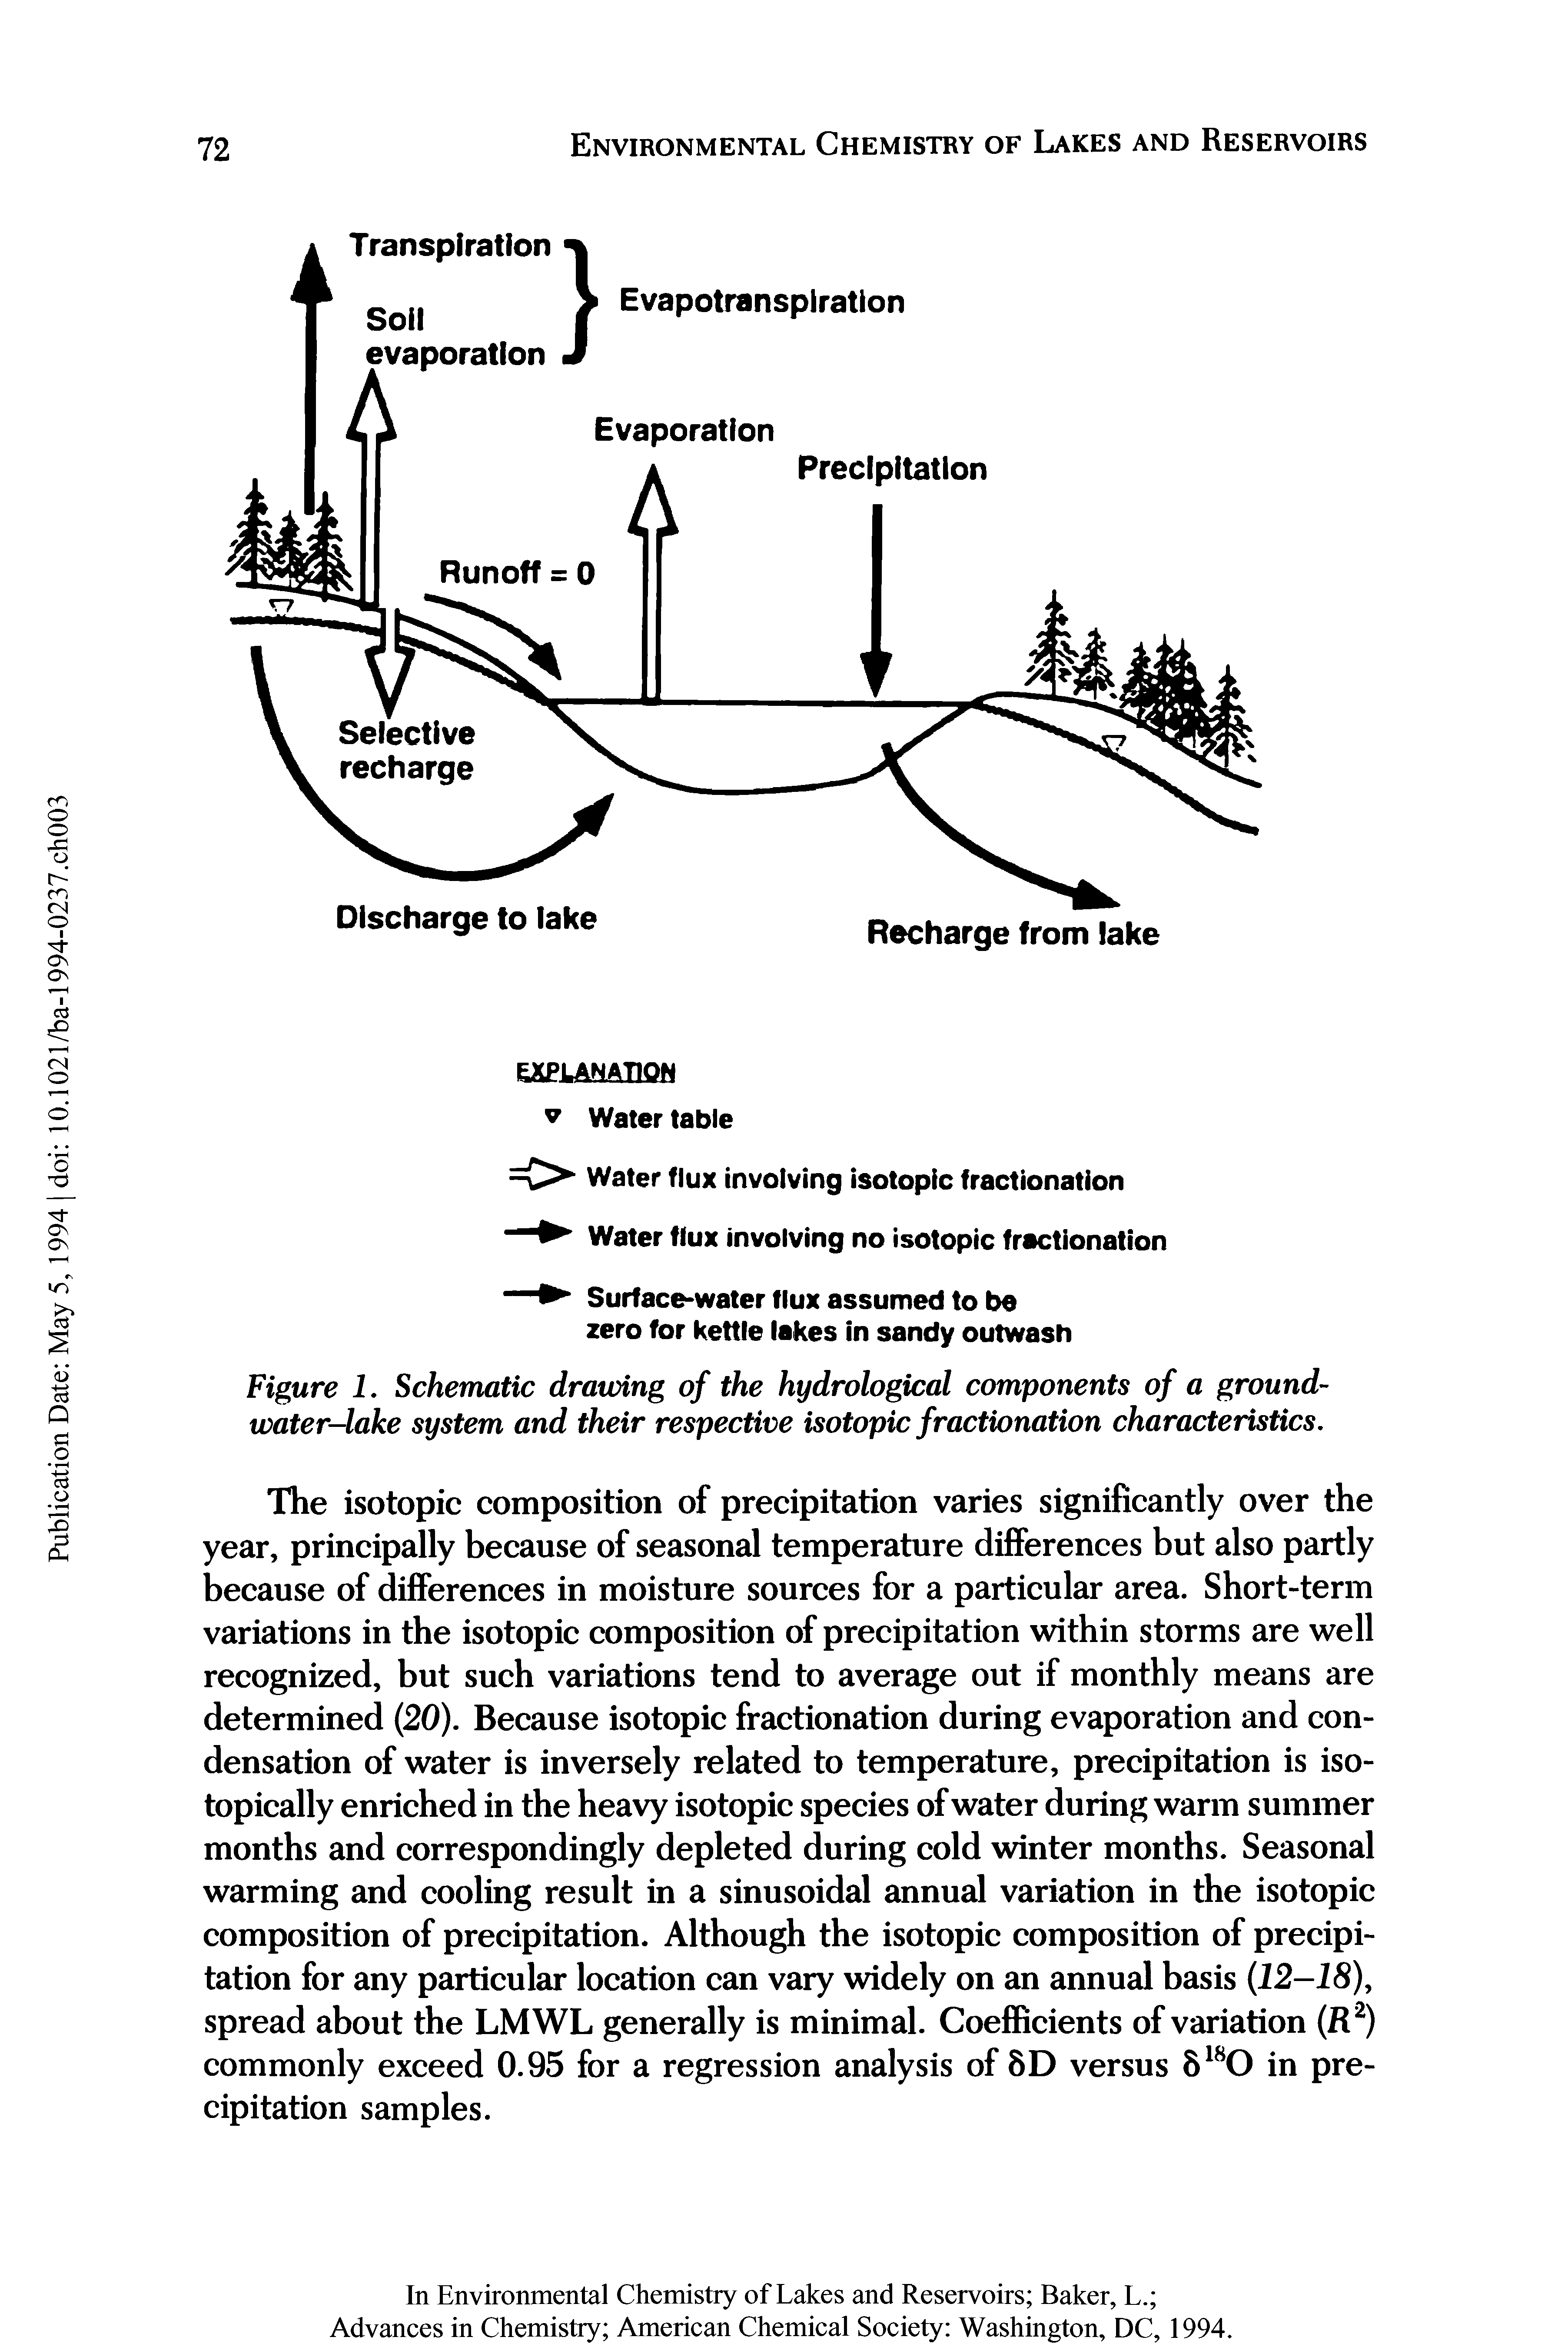 Figure I. Schematic dratoing of the hydrological components of a groundwater-lake system and their respective isotopic fractionation characteristics.